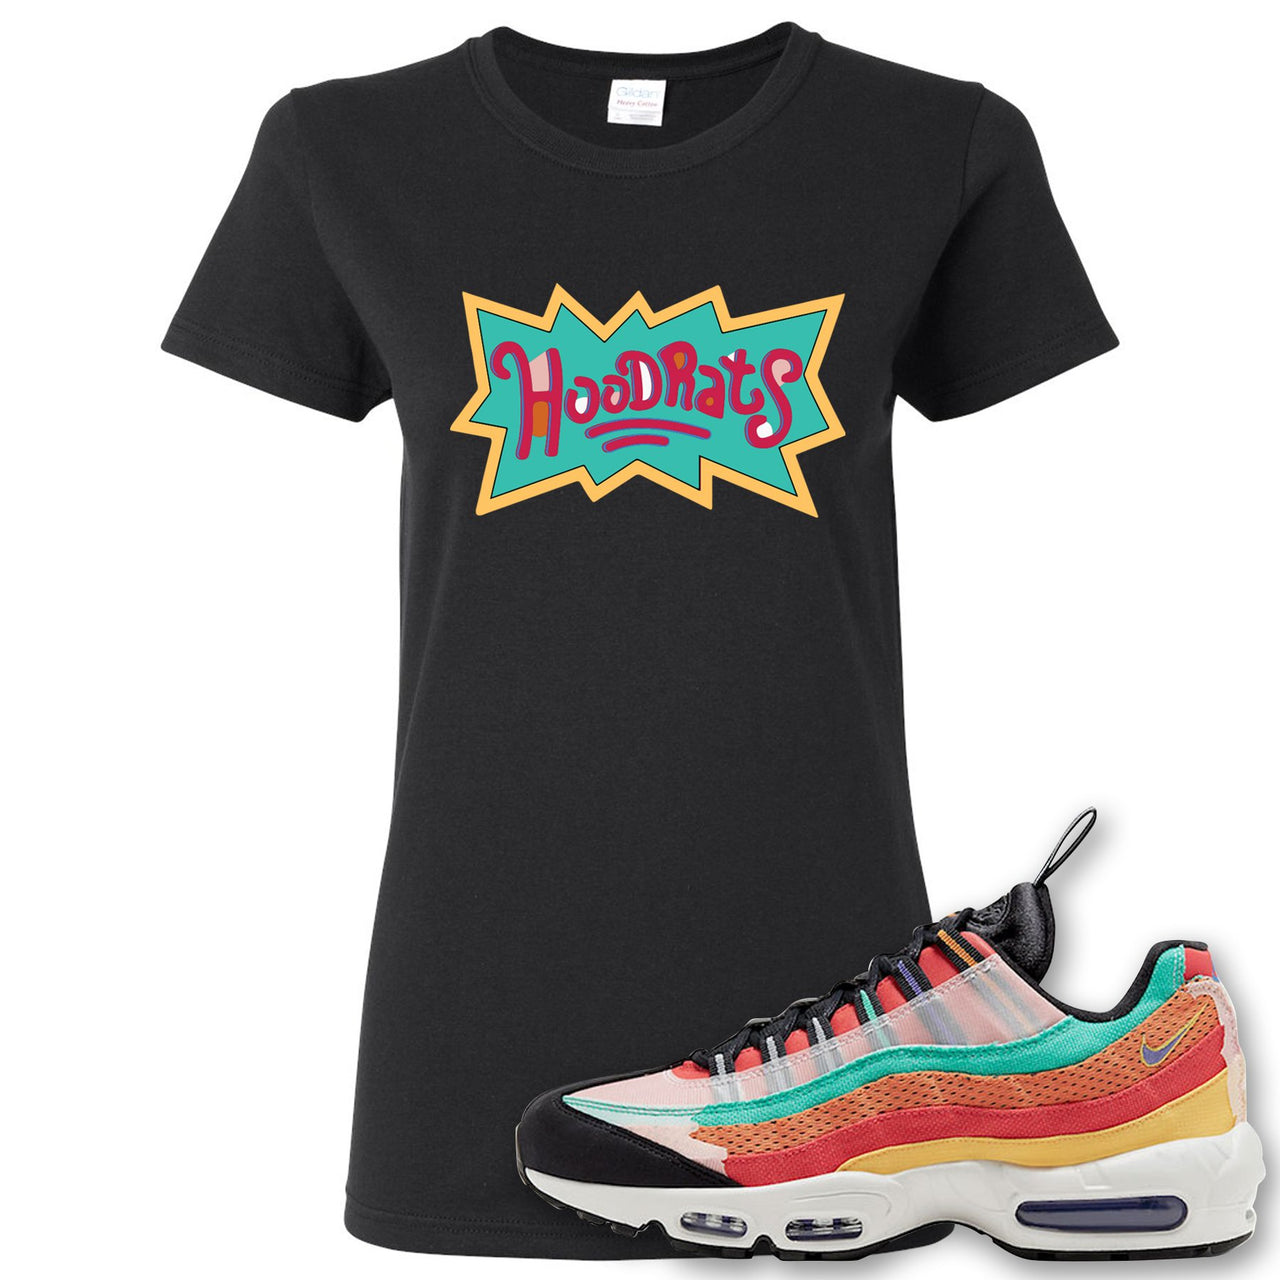 Air Max 95 Black History Month Sneaker Black Women's T Shirt | Women's Tees to match Nike Air Max 95 Black History Month Shoes | Hood Rats